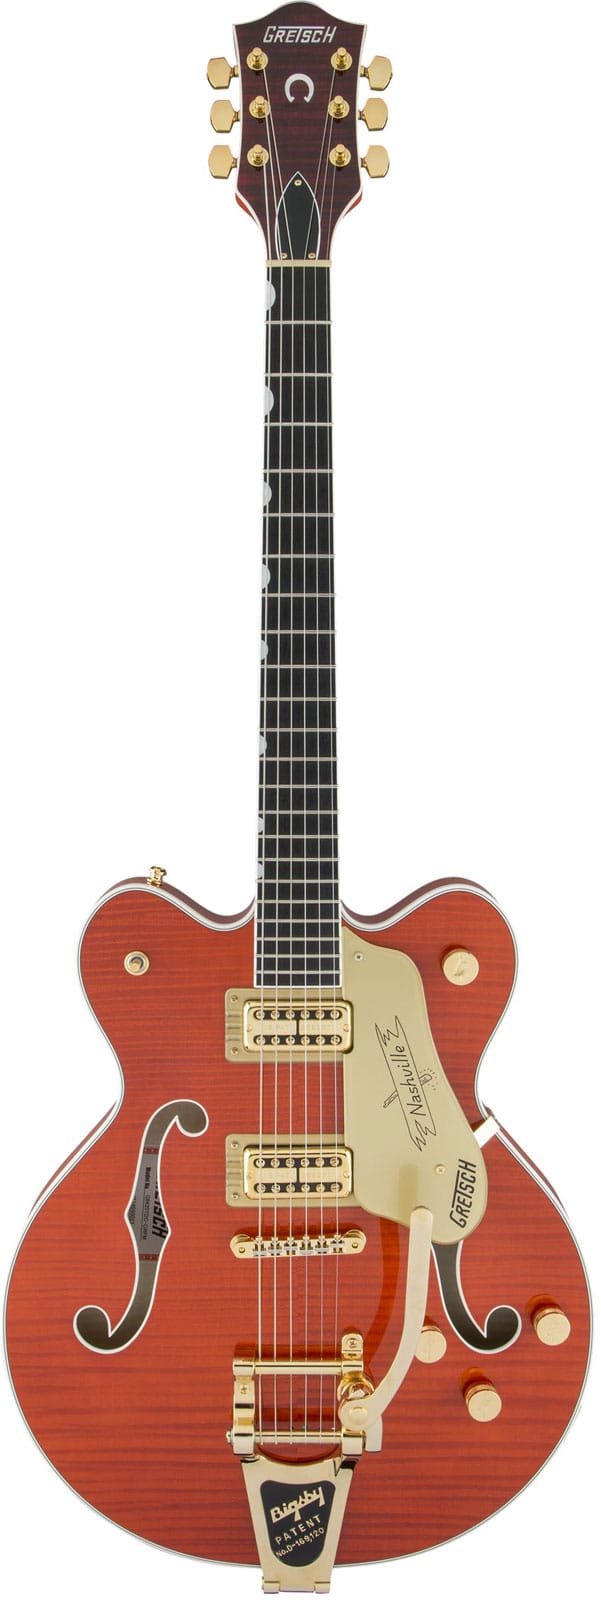 GRETSCH GUITARS G6620TFM PLAYERS EDITION NASHVILLE CENTER BLOCK DOUBLE-CUT WITH STRING-THRU BIGSBY AND FLAME MAPLE,